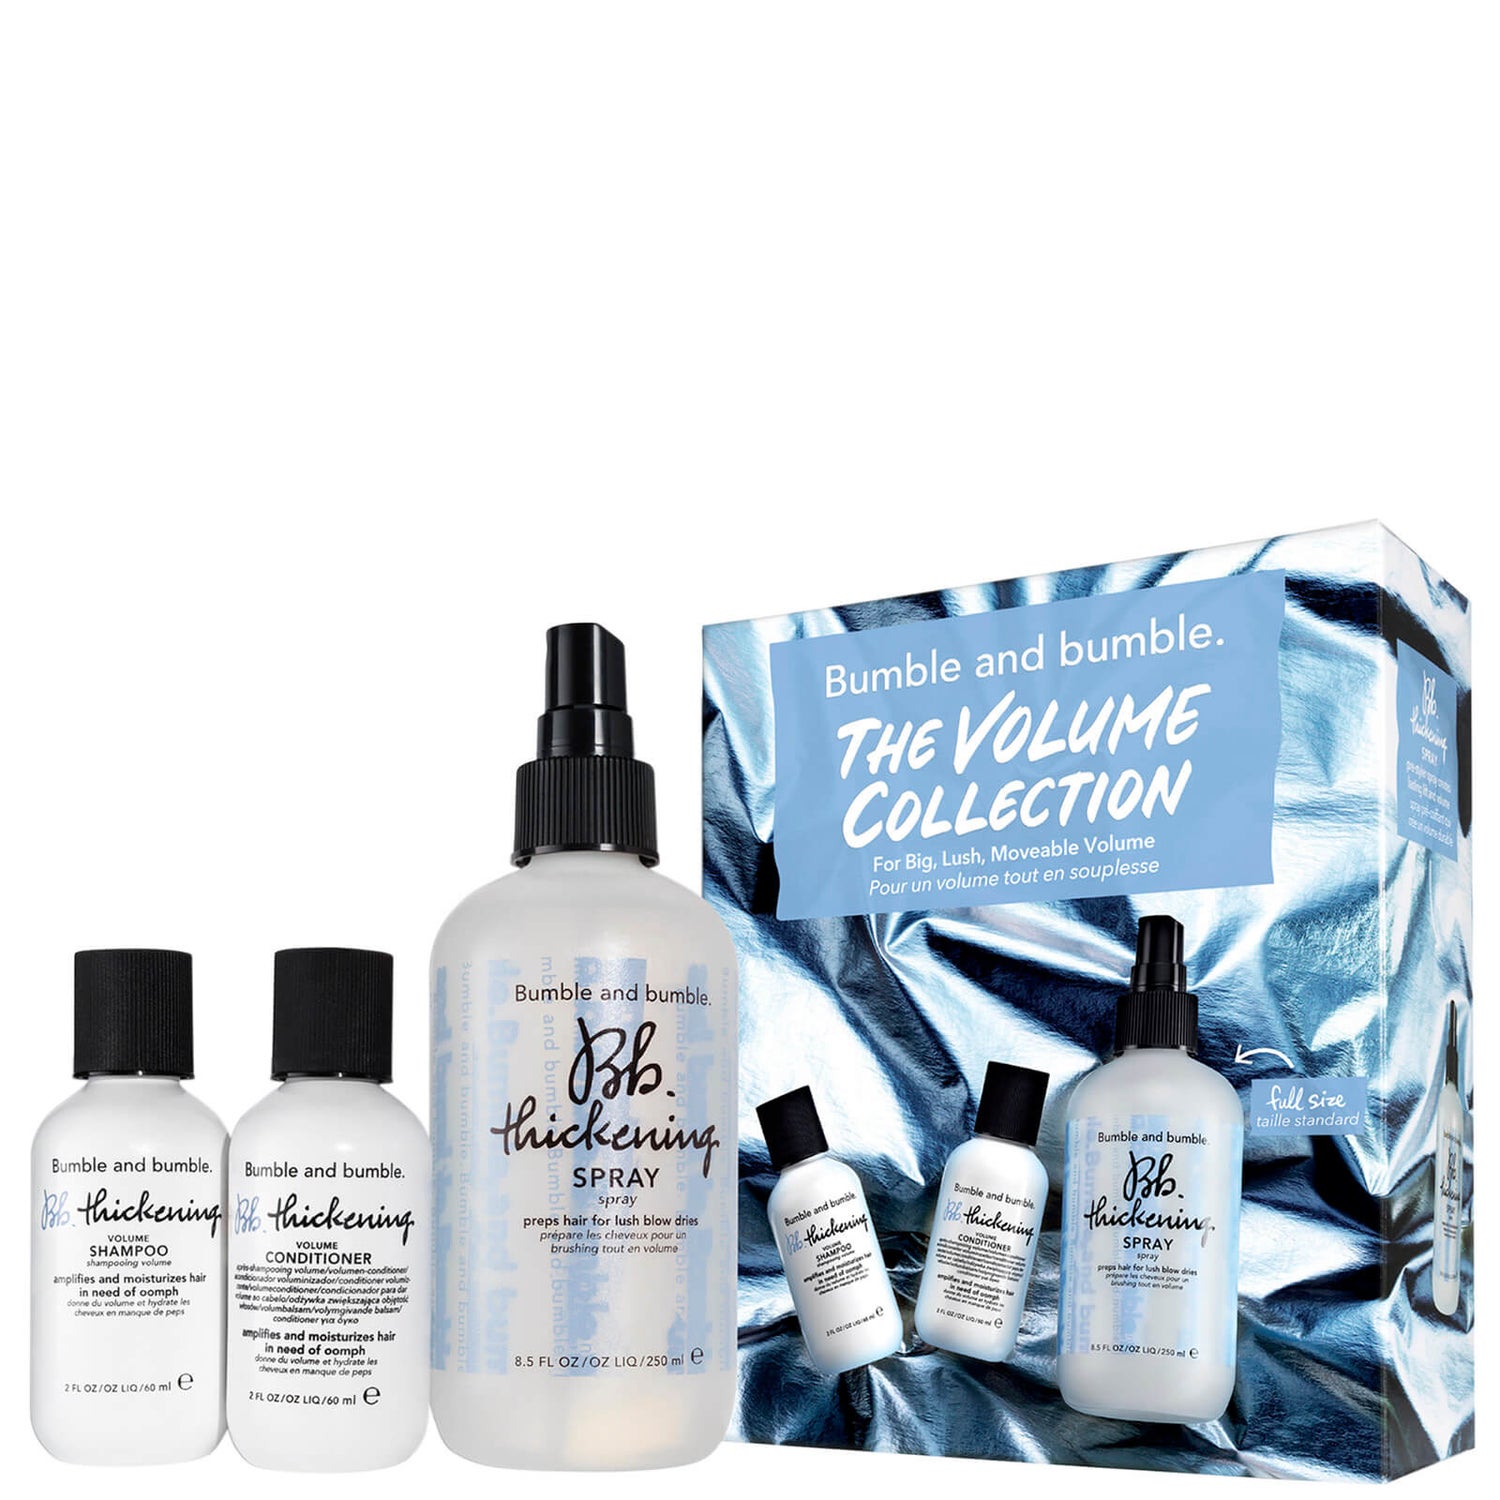 The Volume Collection Bumble and bumble